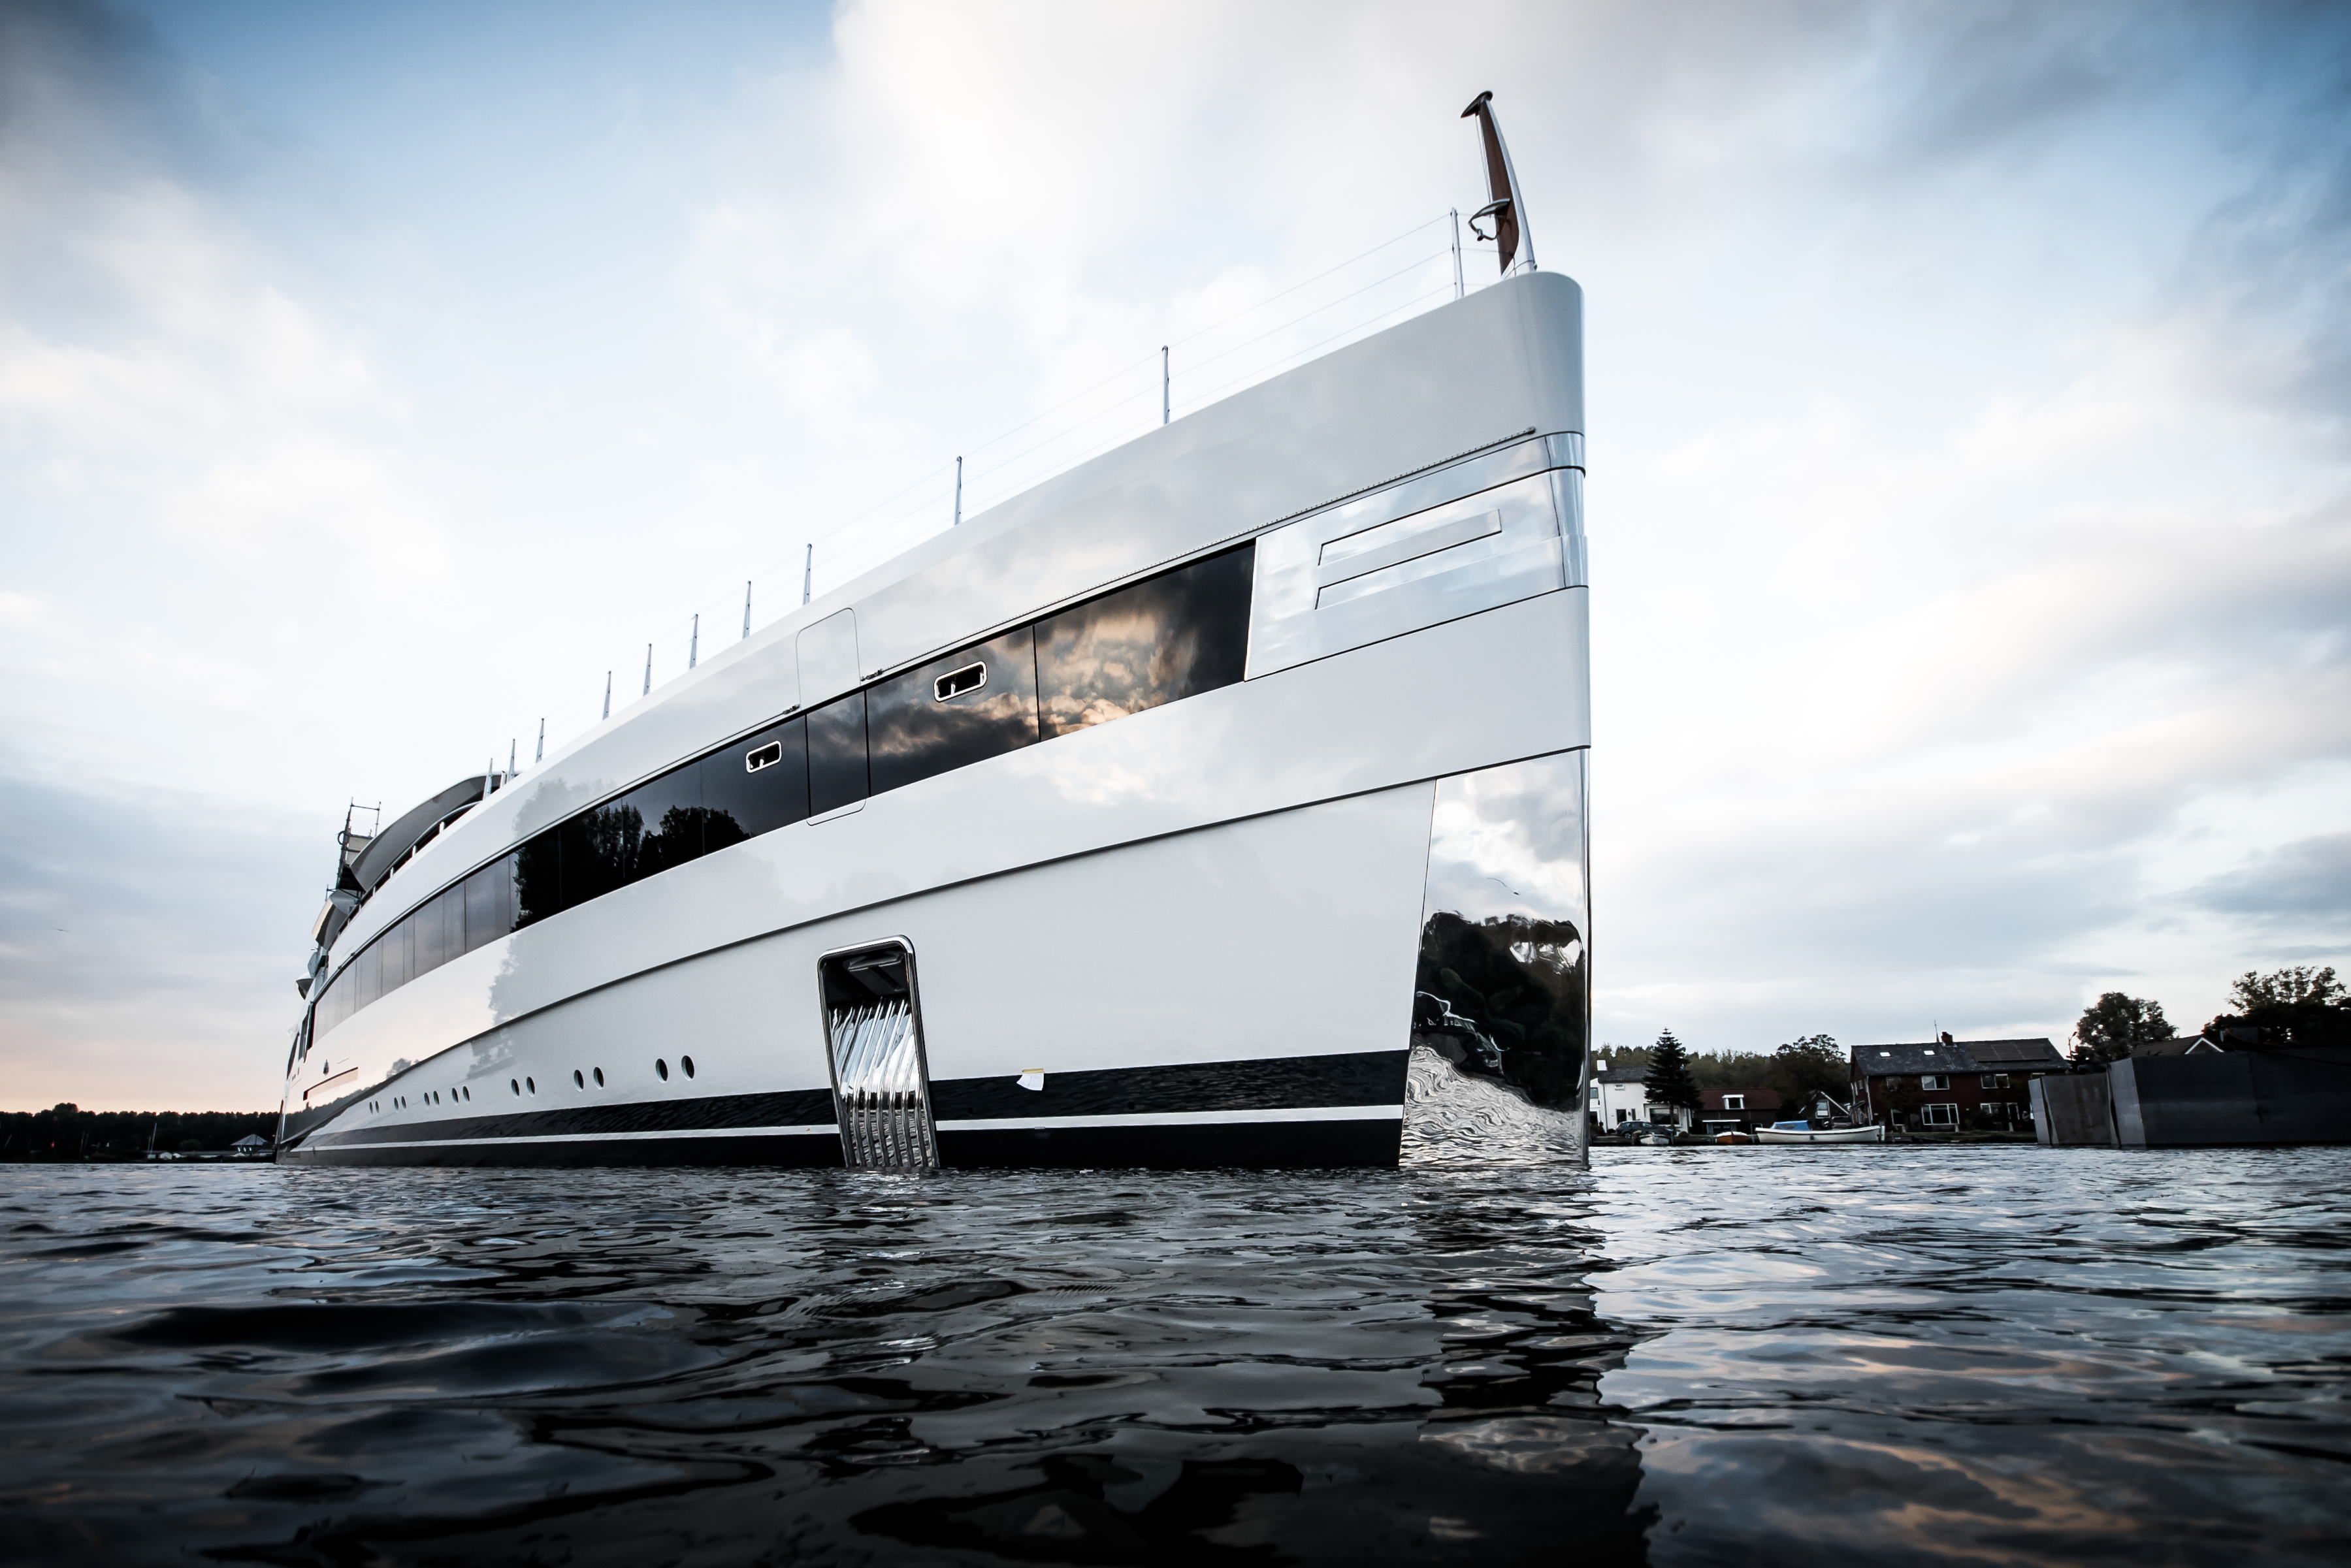 feadship yacht meaning